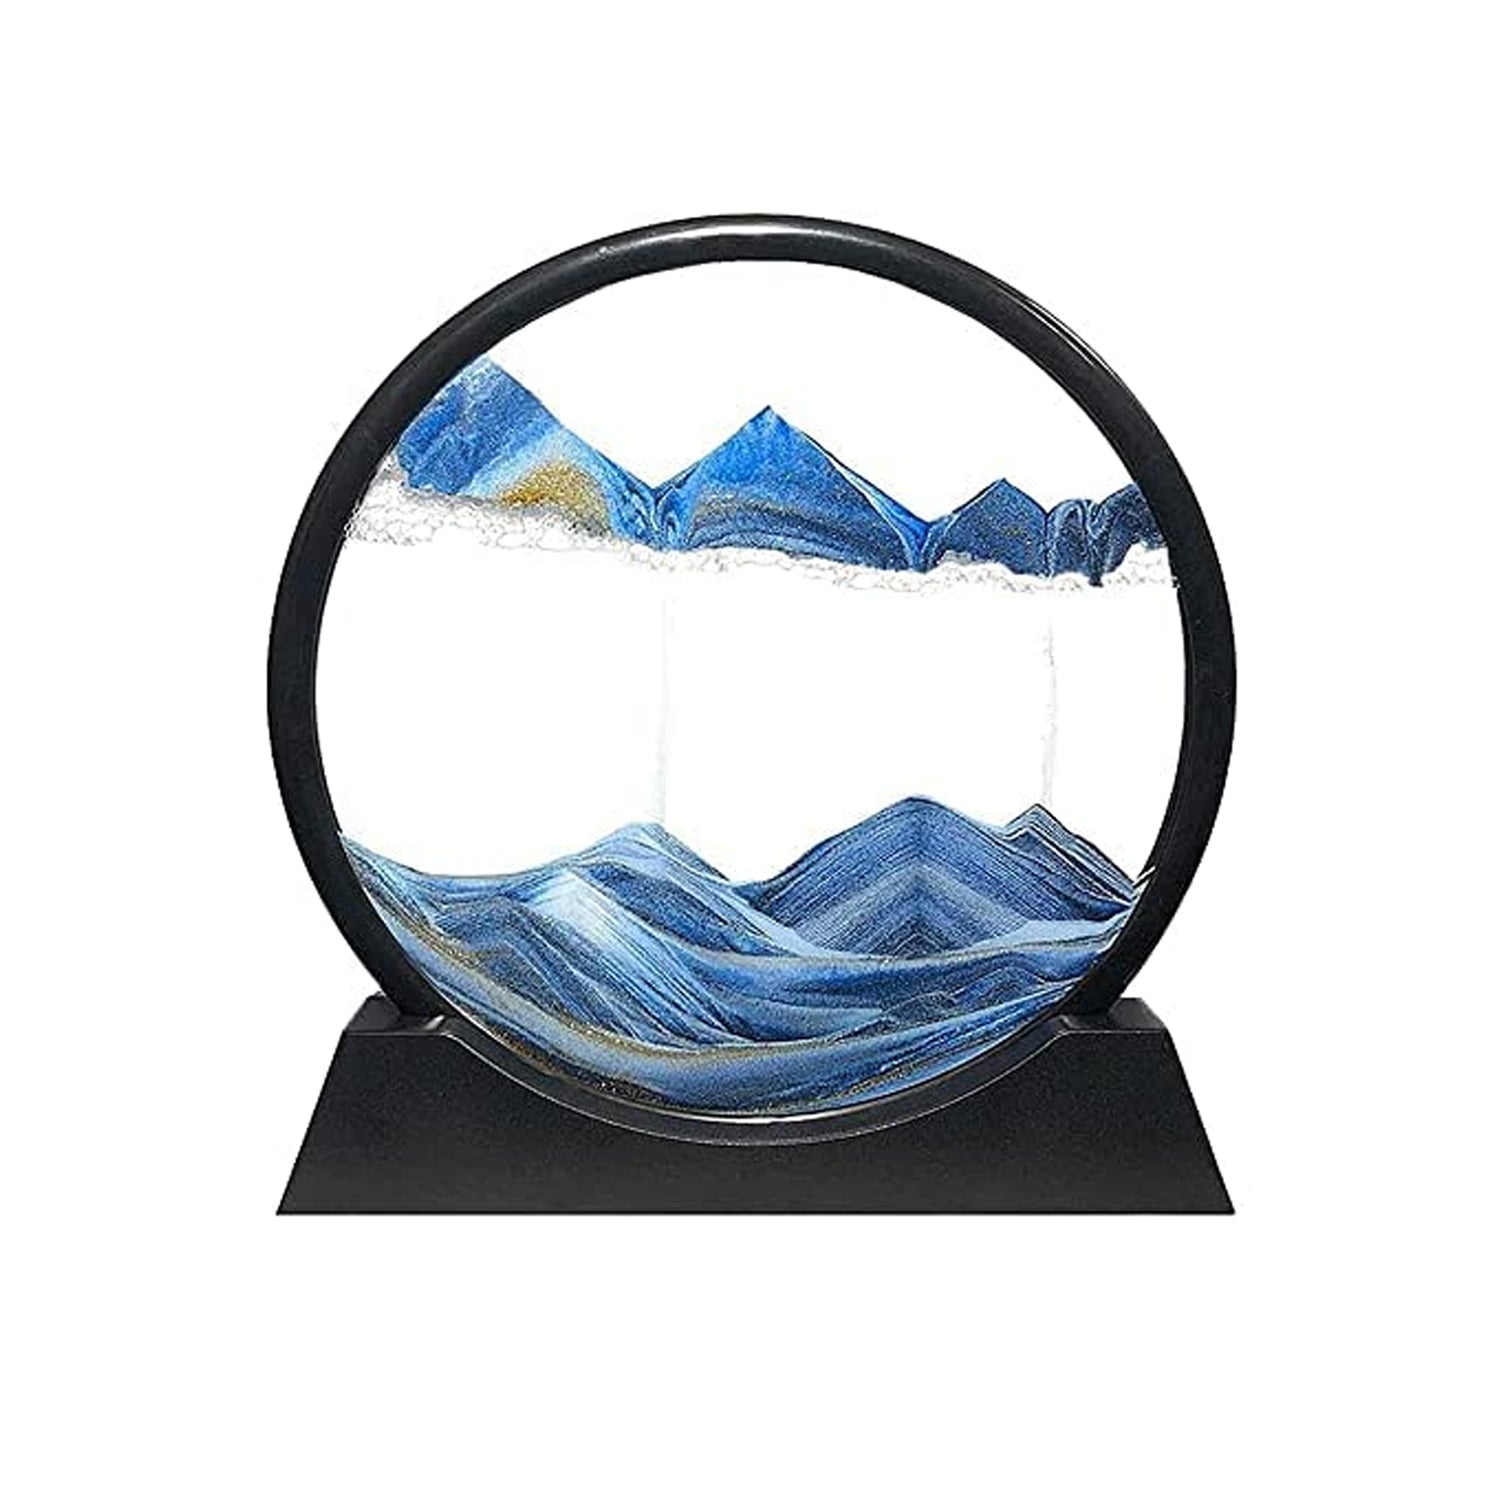 8781 Moving Sand Art Picture Decor, 3D Deep Sea Sandscape Liquid Motion, Round Glass Frame Display Flowing Sand Relaxing Gift for Kids Adults Painting Artistic Sandscape for Home, Office, Ornament Desktop Art Bookshelves Decoration (1 Pc )